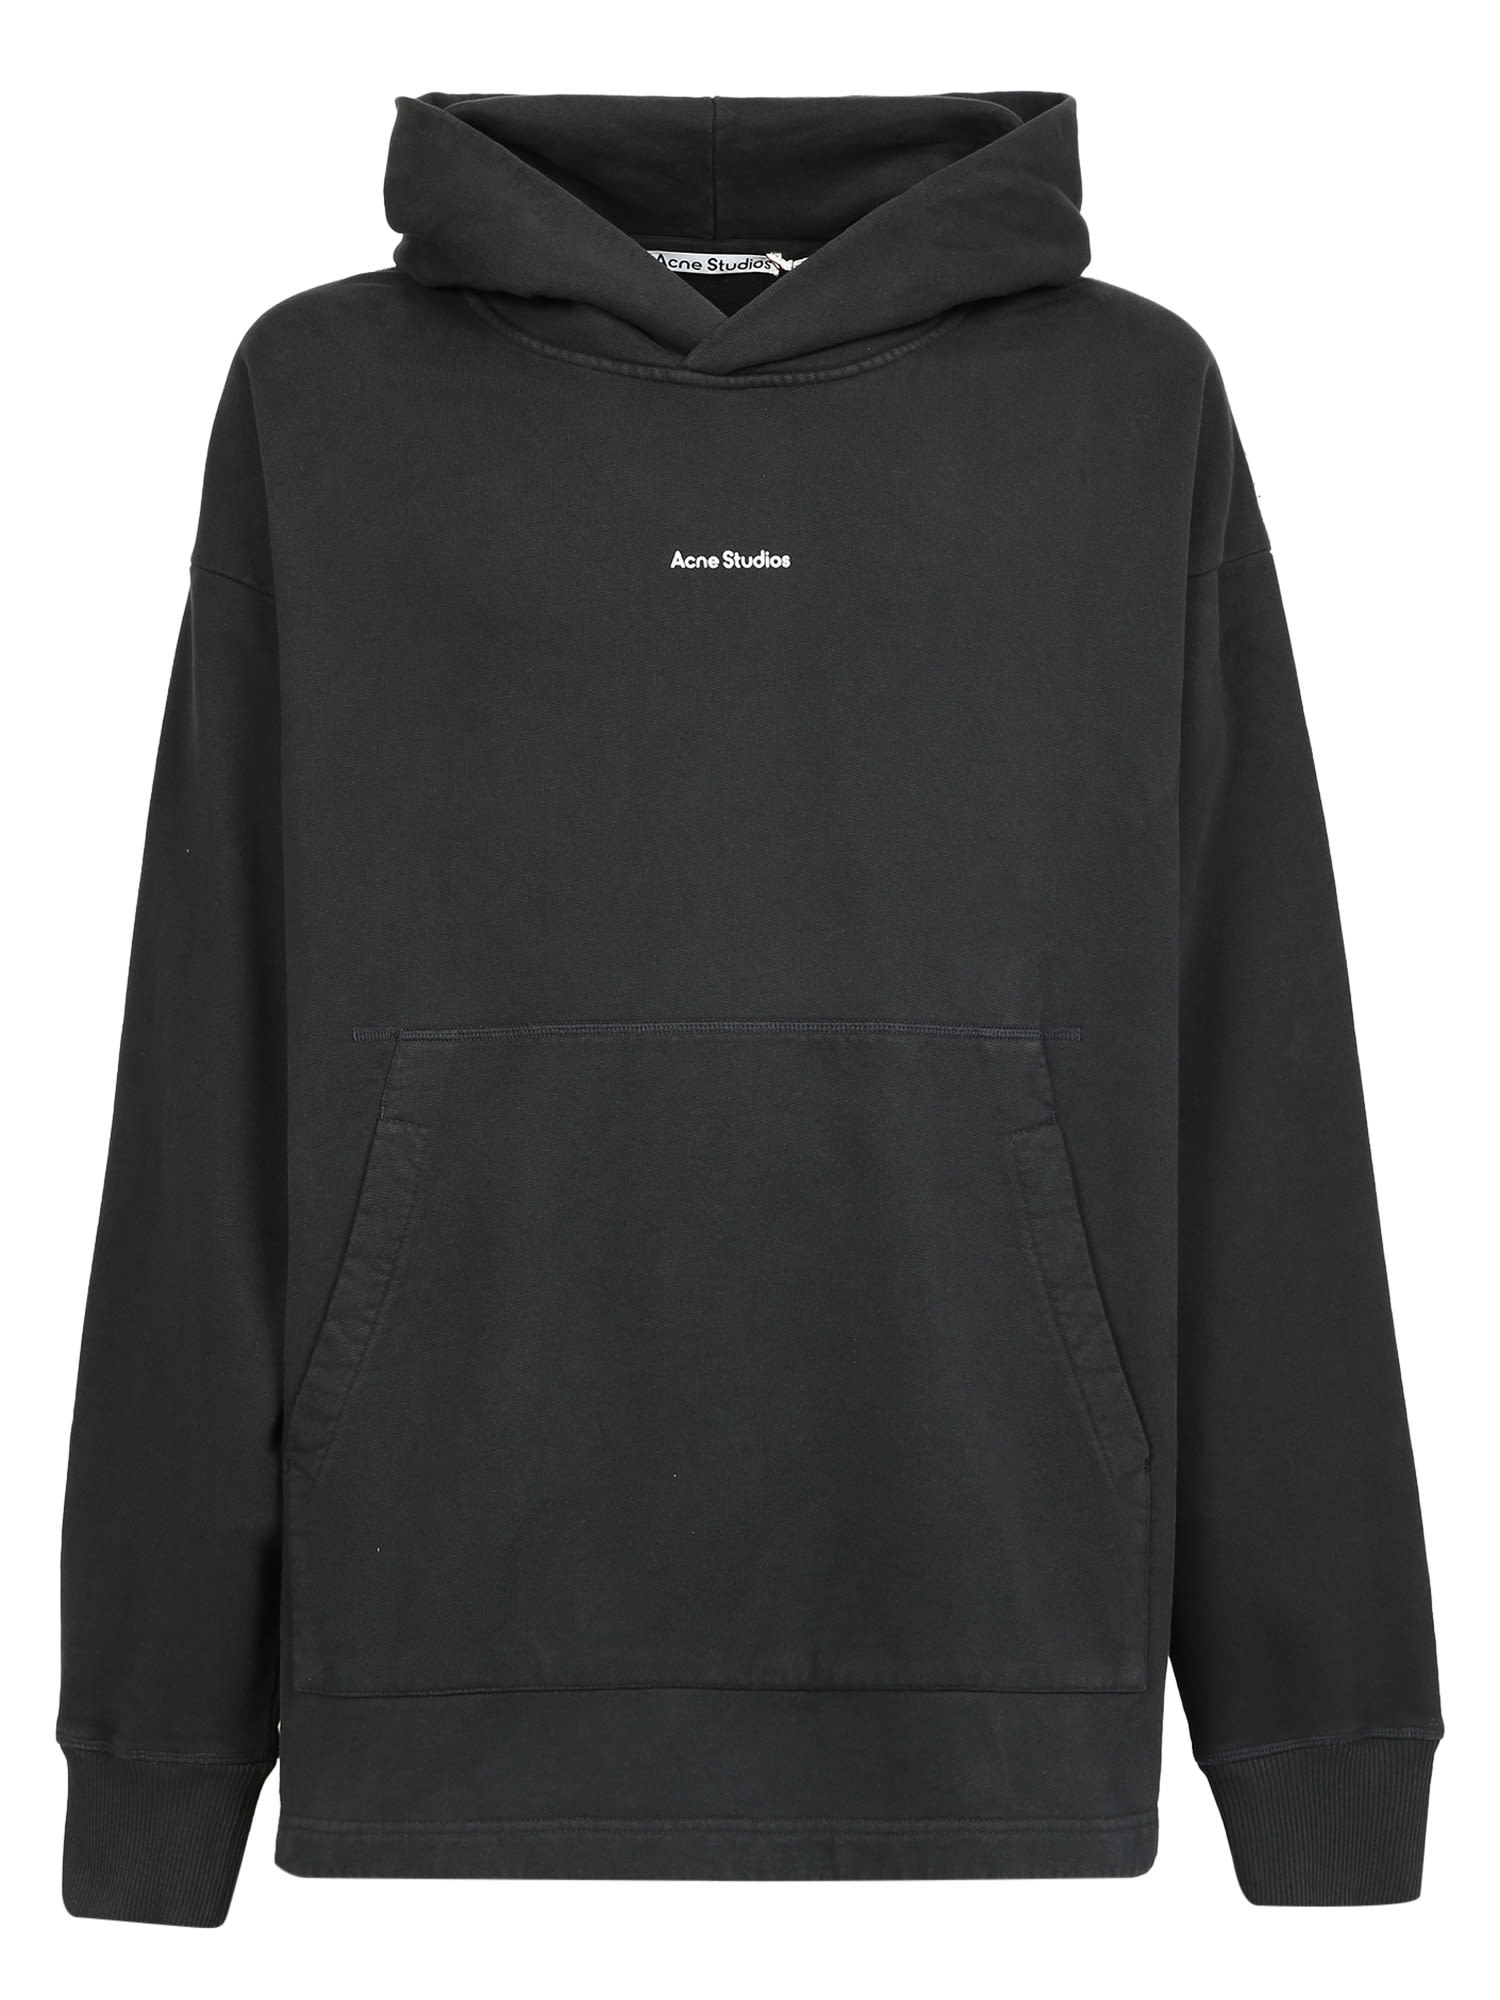 Combining Comfort And Style, Acne Studios Present This Hoodie With An Oversized Fit